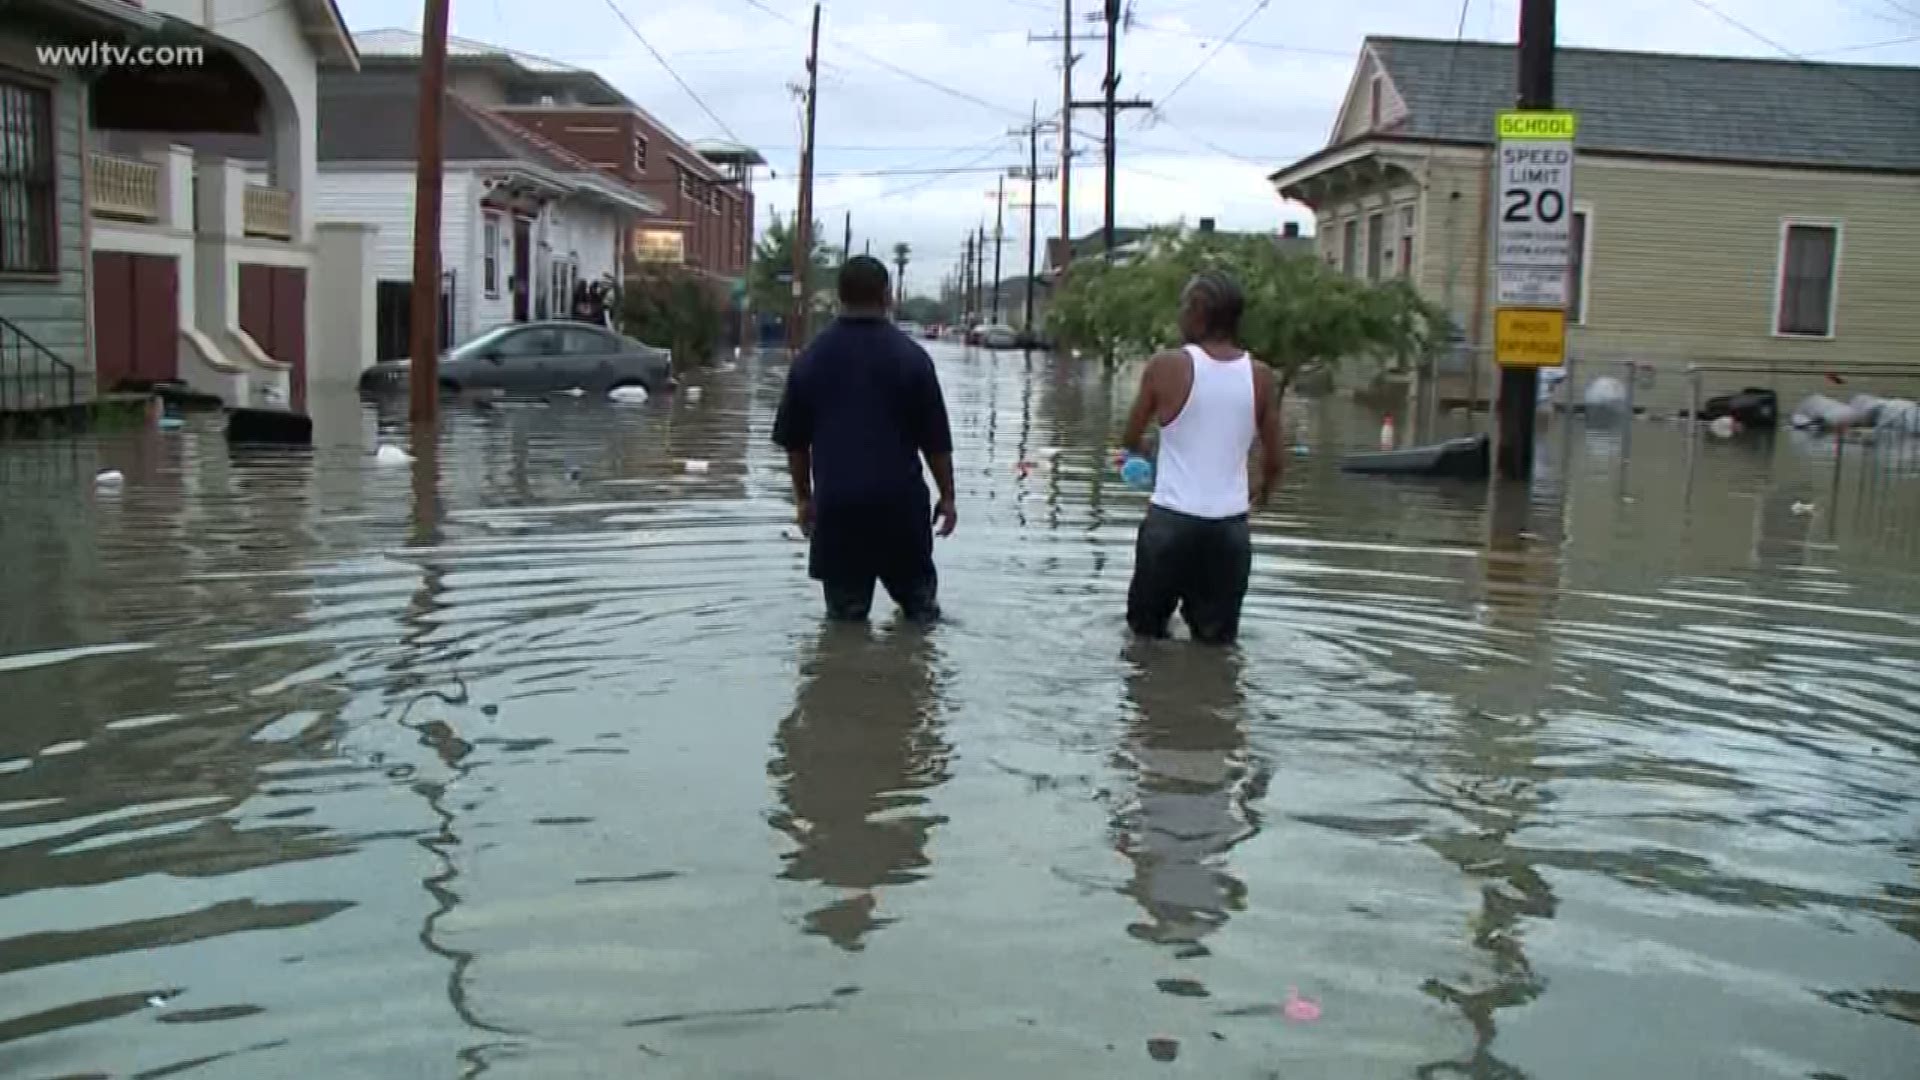 "New Orleans is a bowl. In other words, you're surrounded by water."